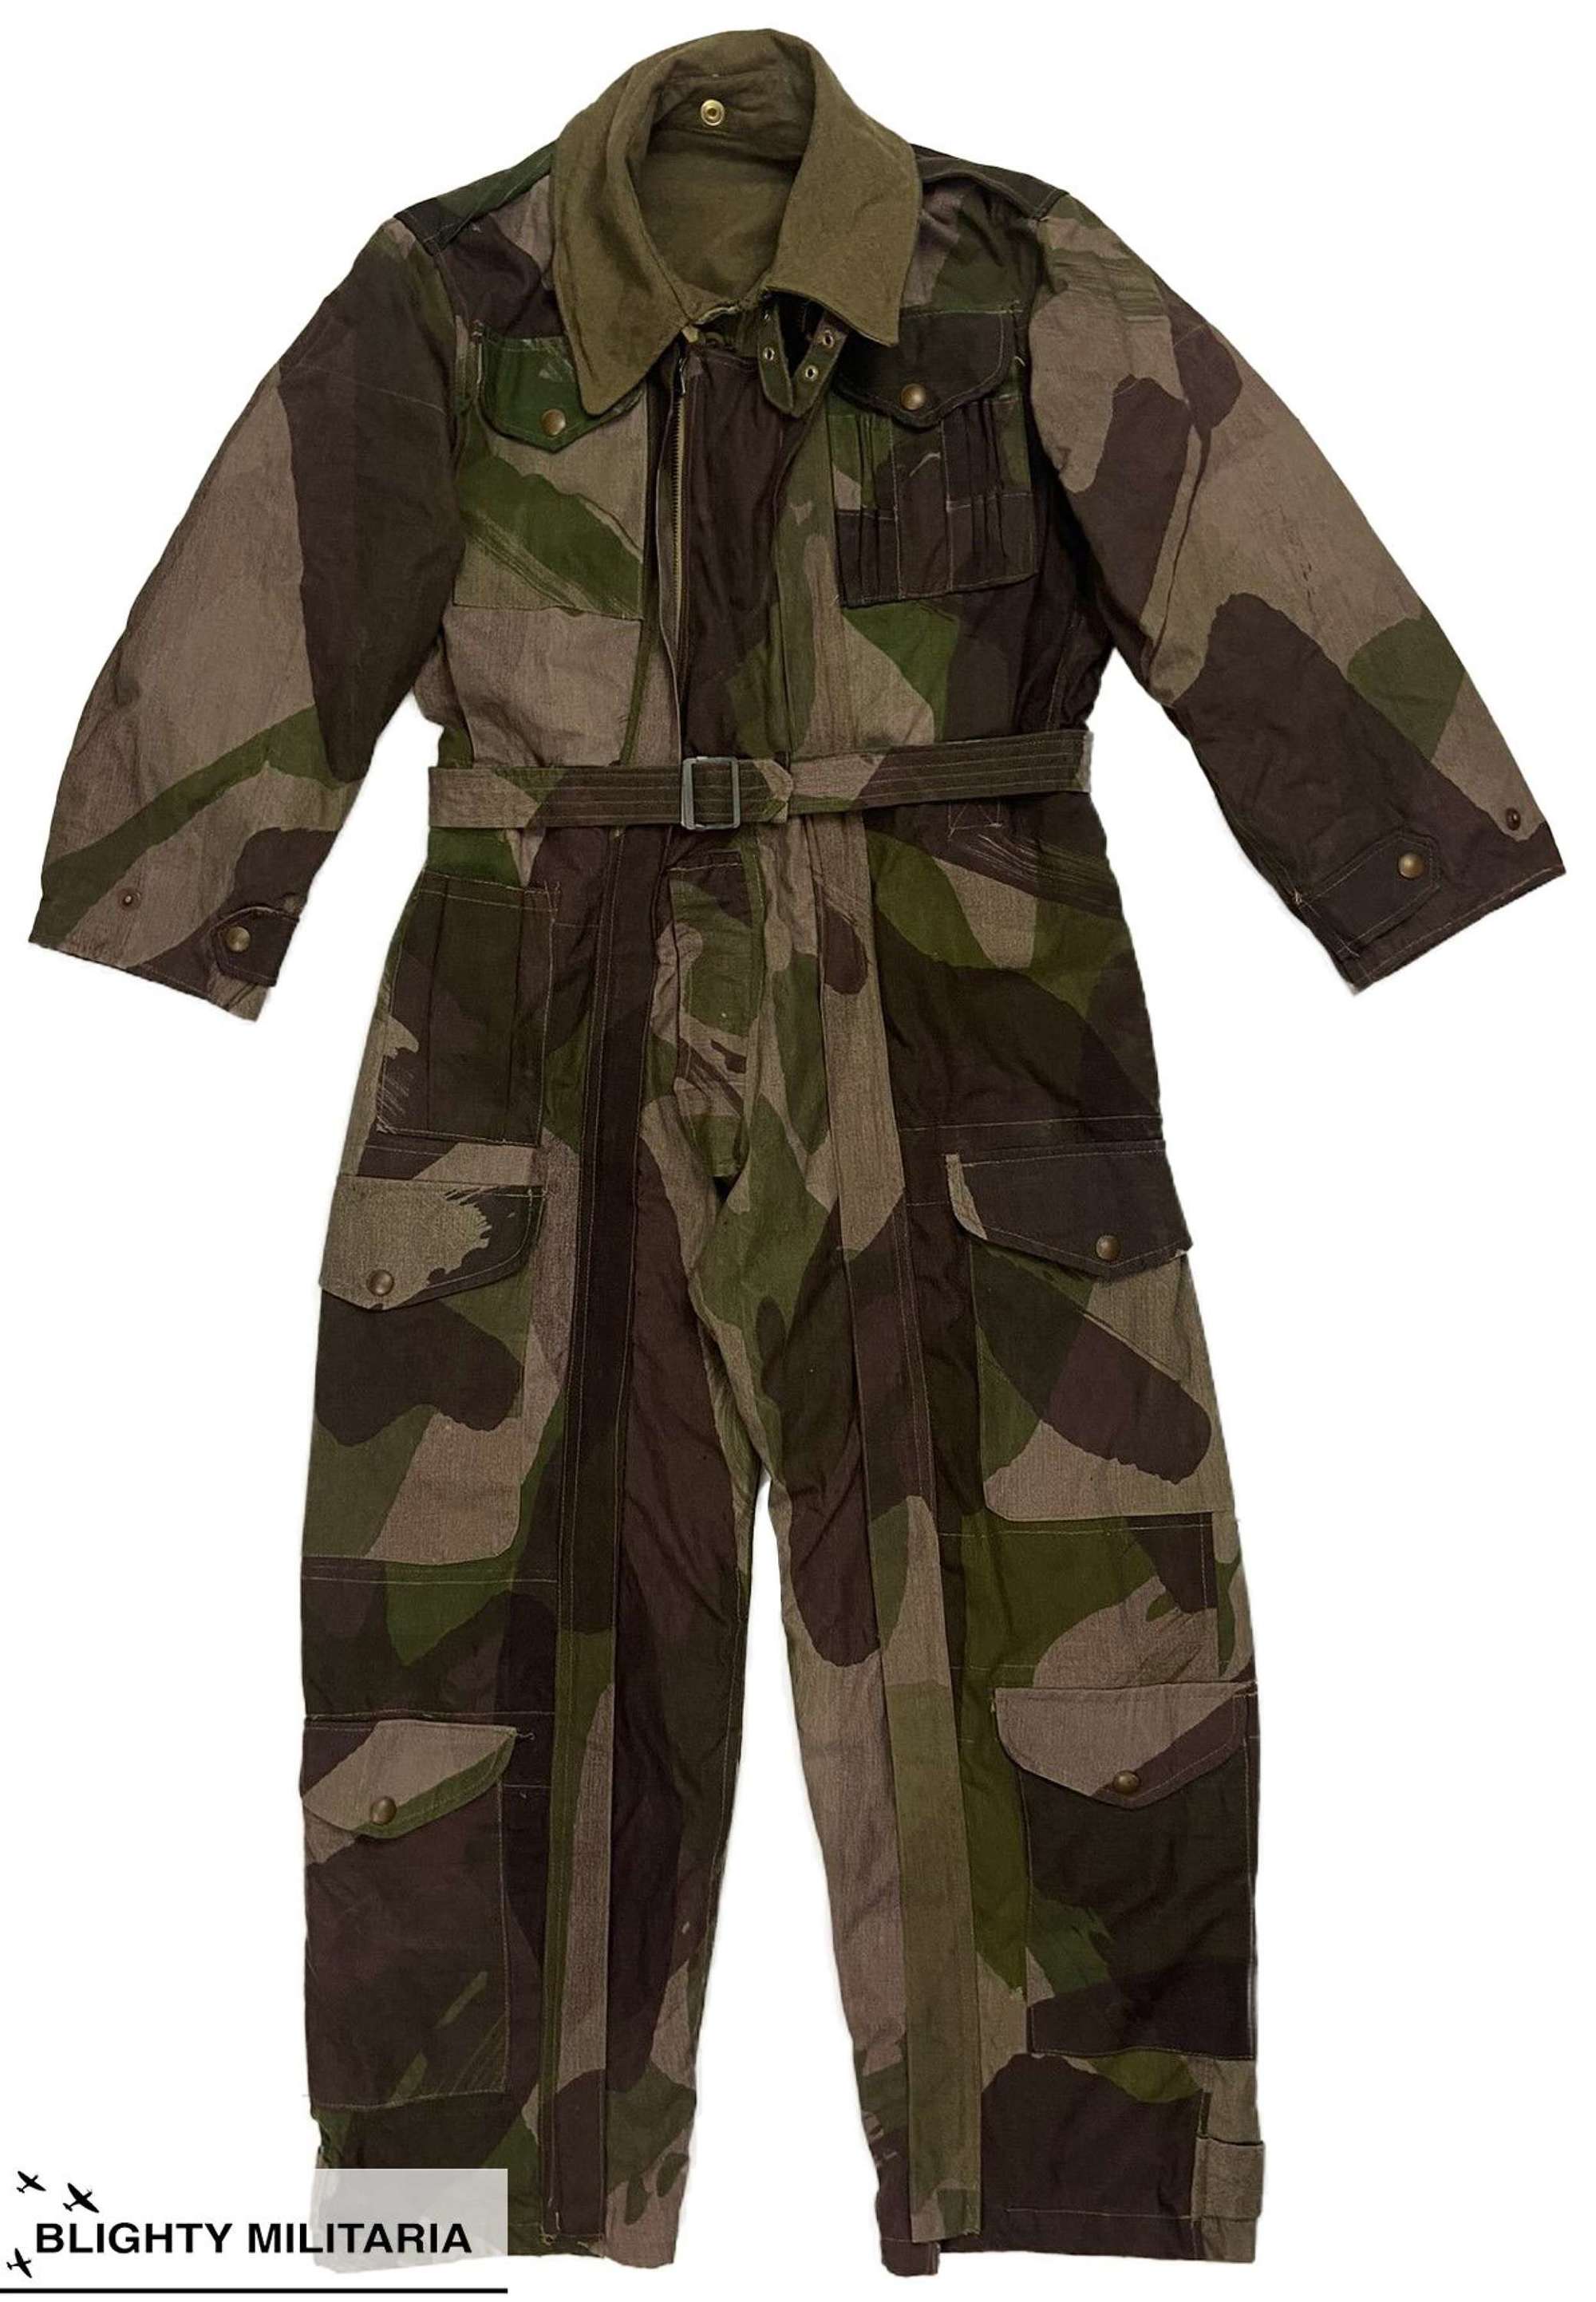 Original 1945 Dated British Army Camouflage Tank Suit - Size 1